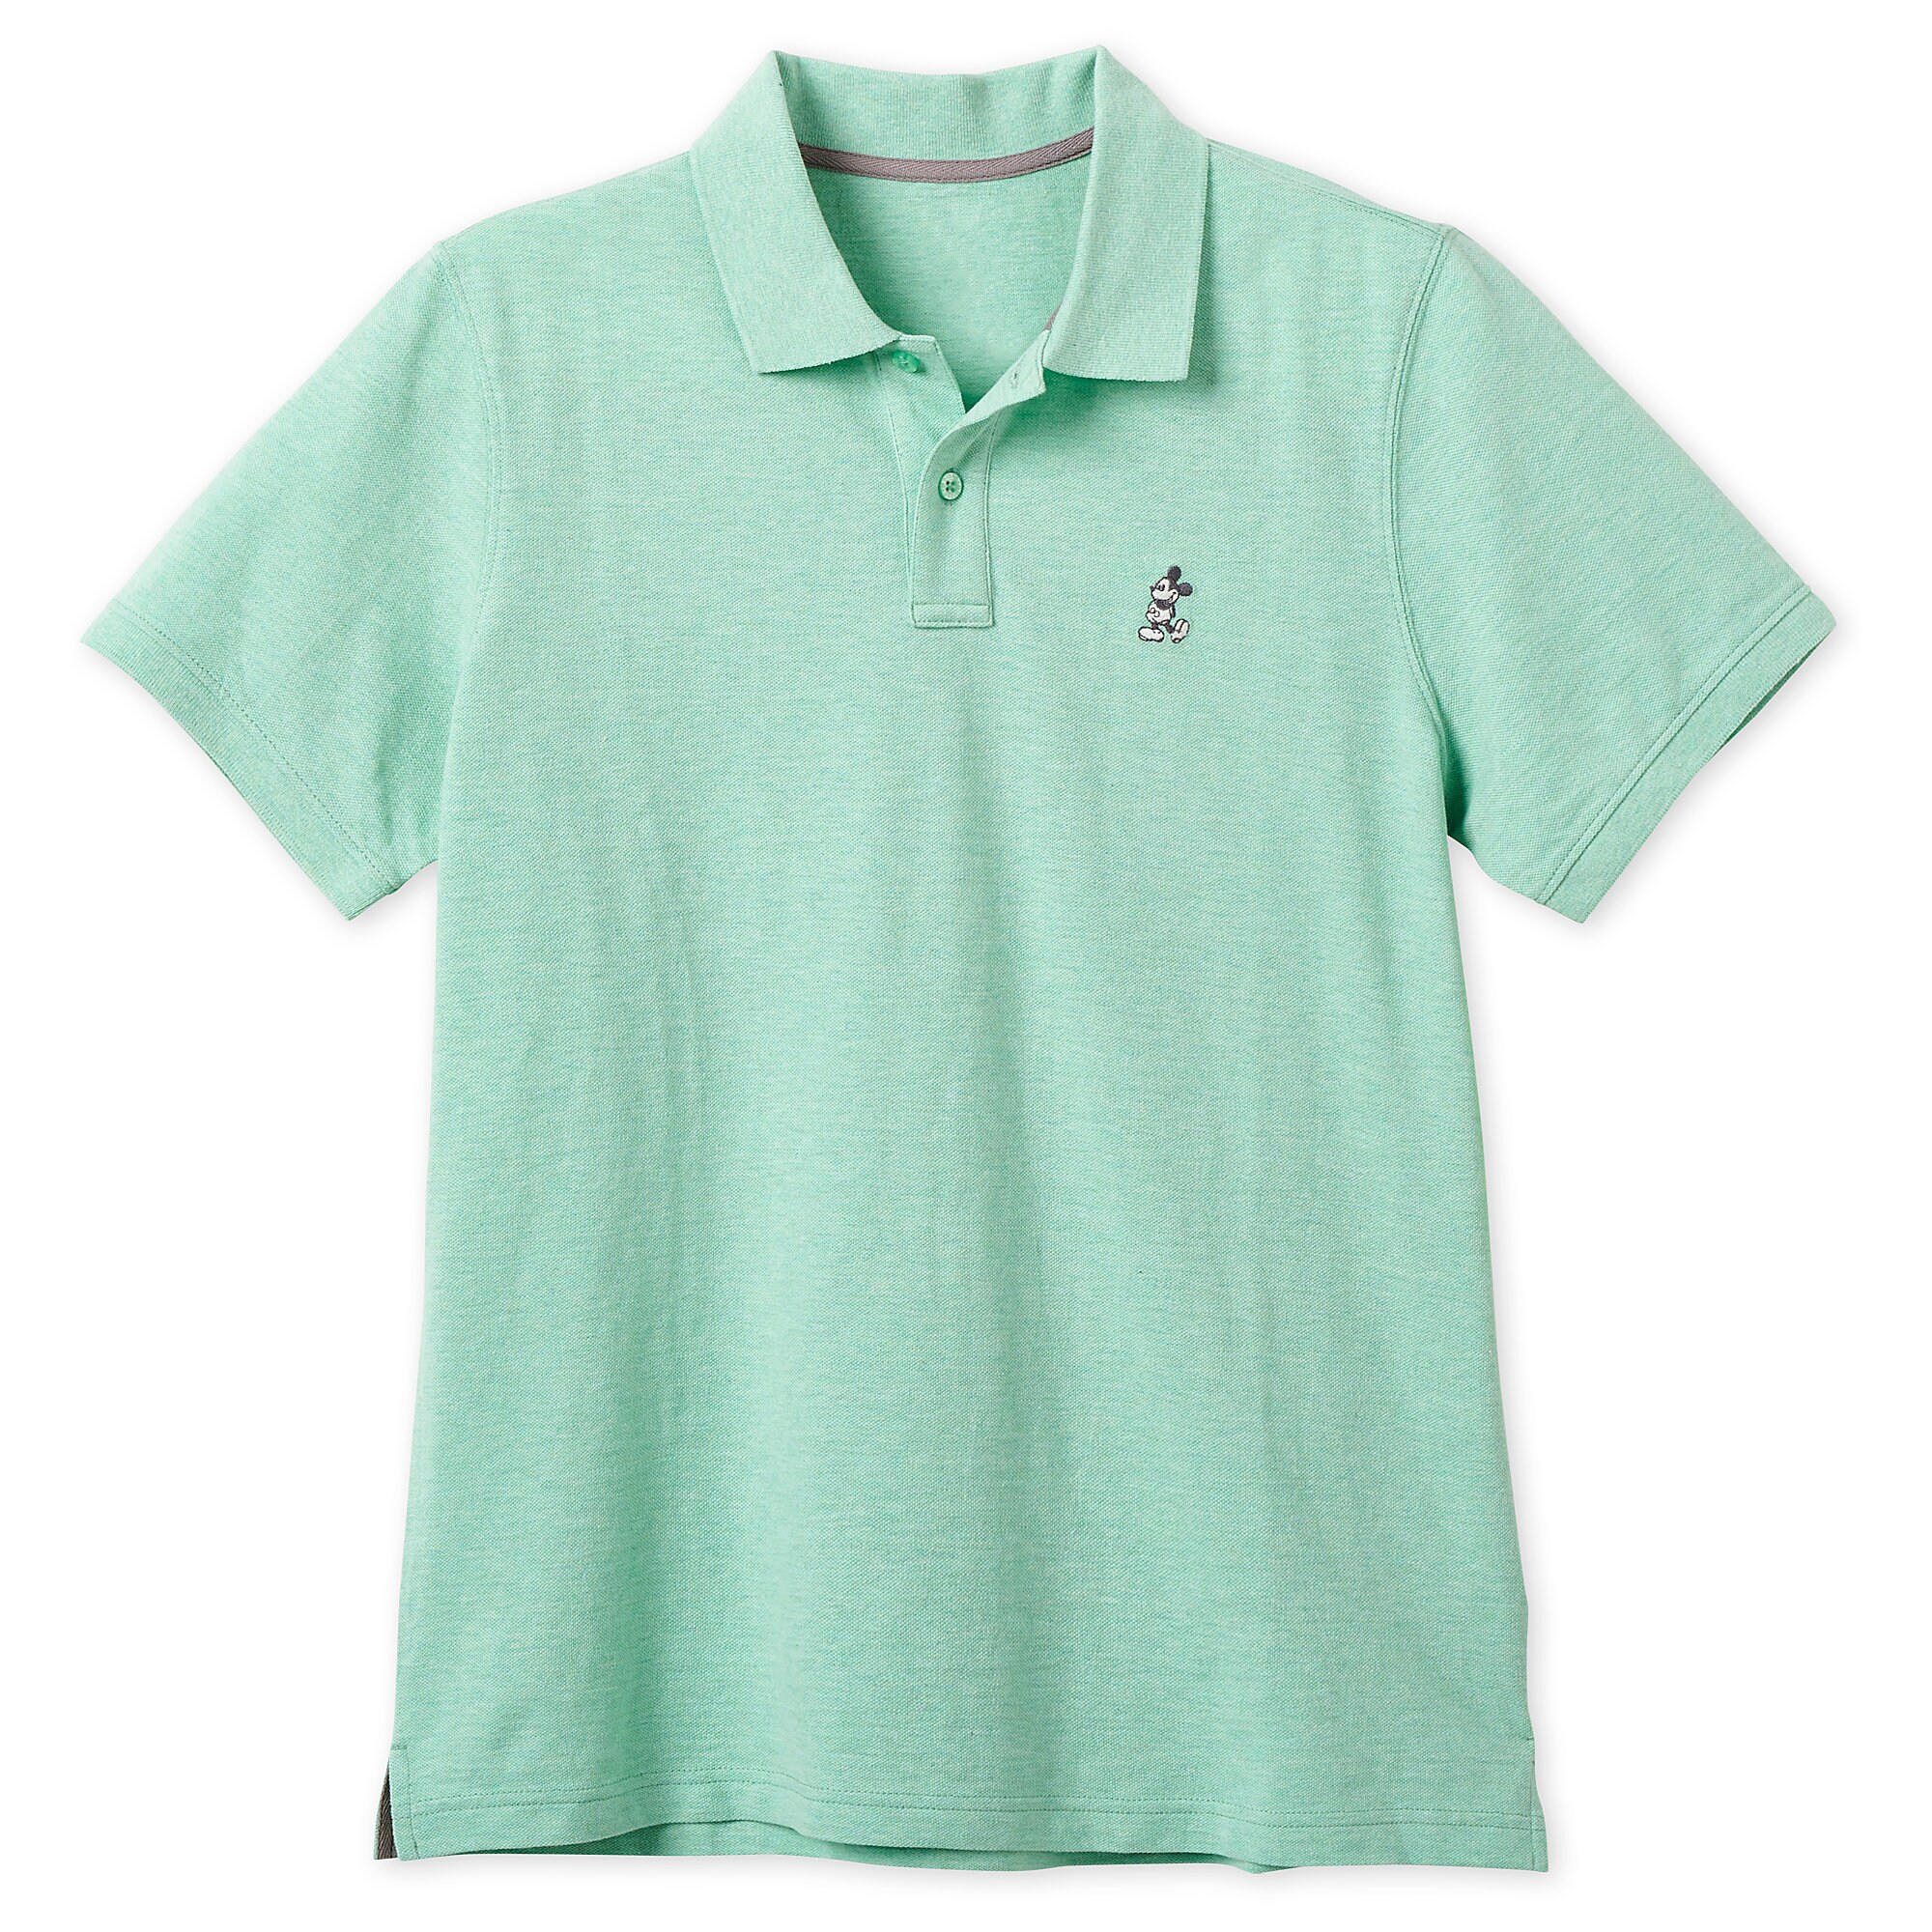 Mickey Mouse Pique Cotton Polo Shirt for Men - Heathered Mint